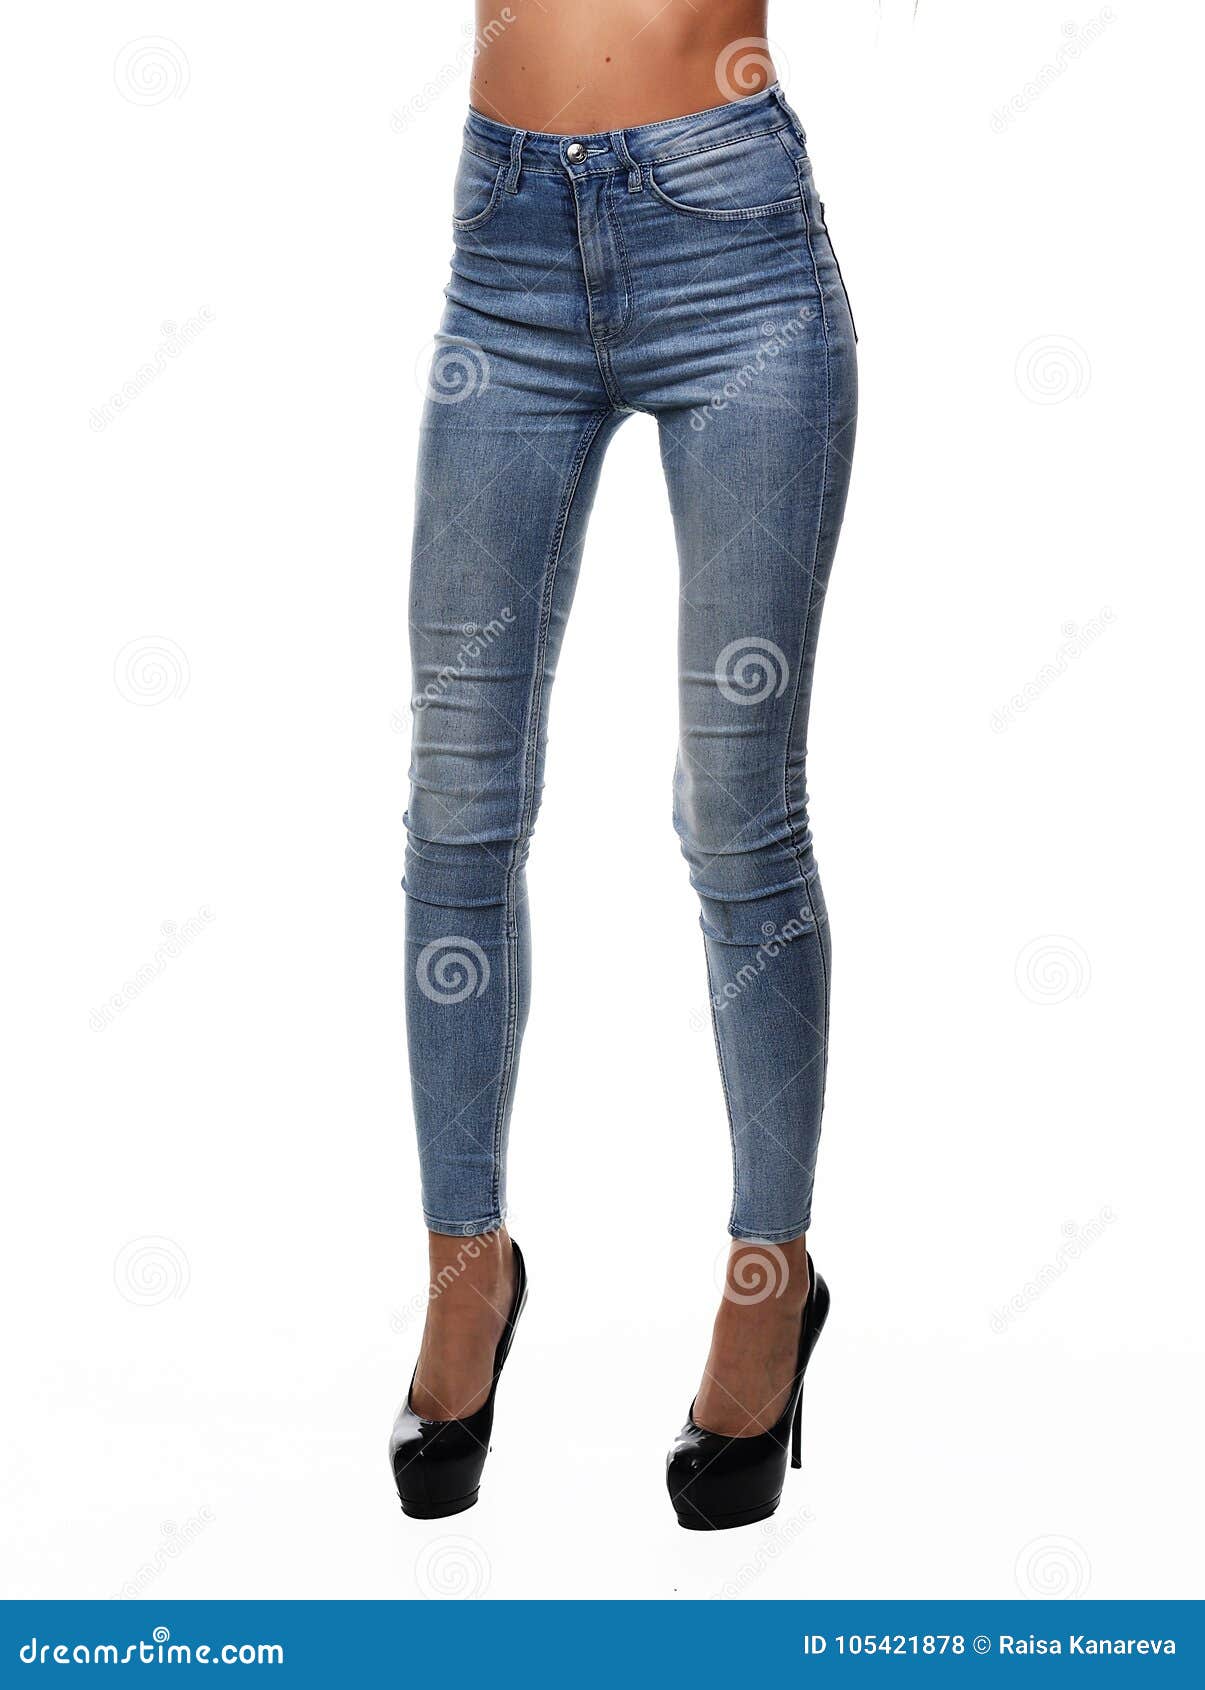 Legs in Jeans Belongs To Beautiful Girl. Isolated on White Back Stock ...